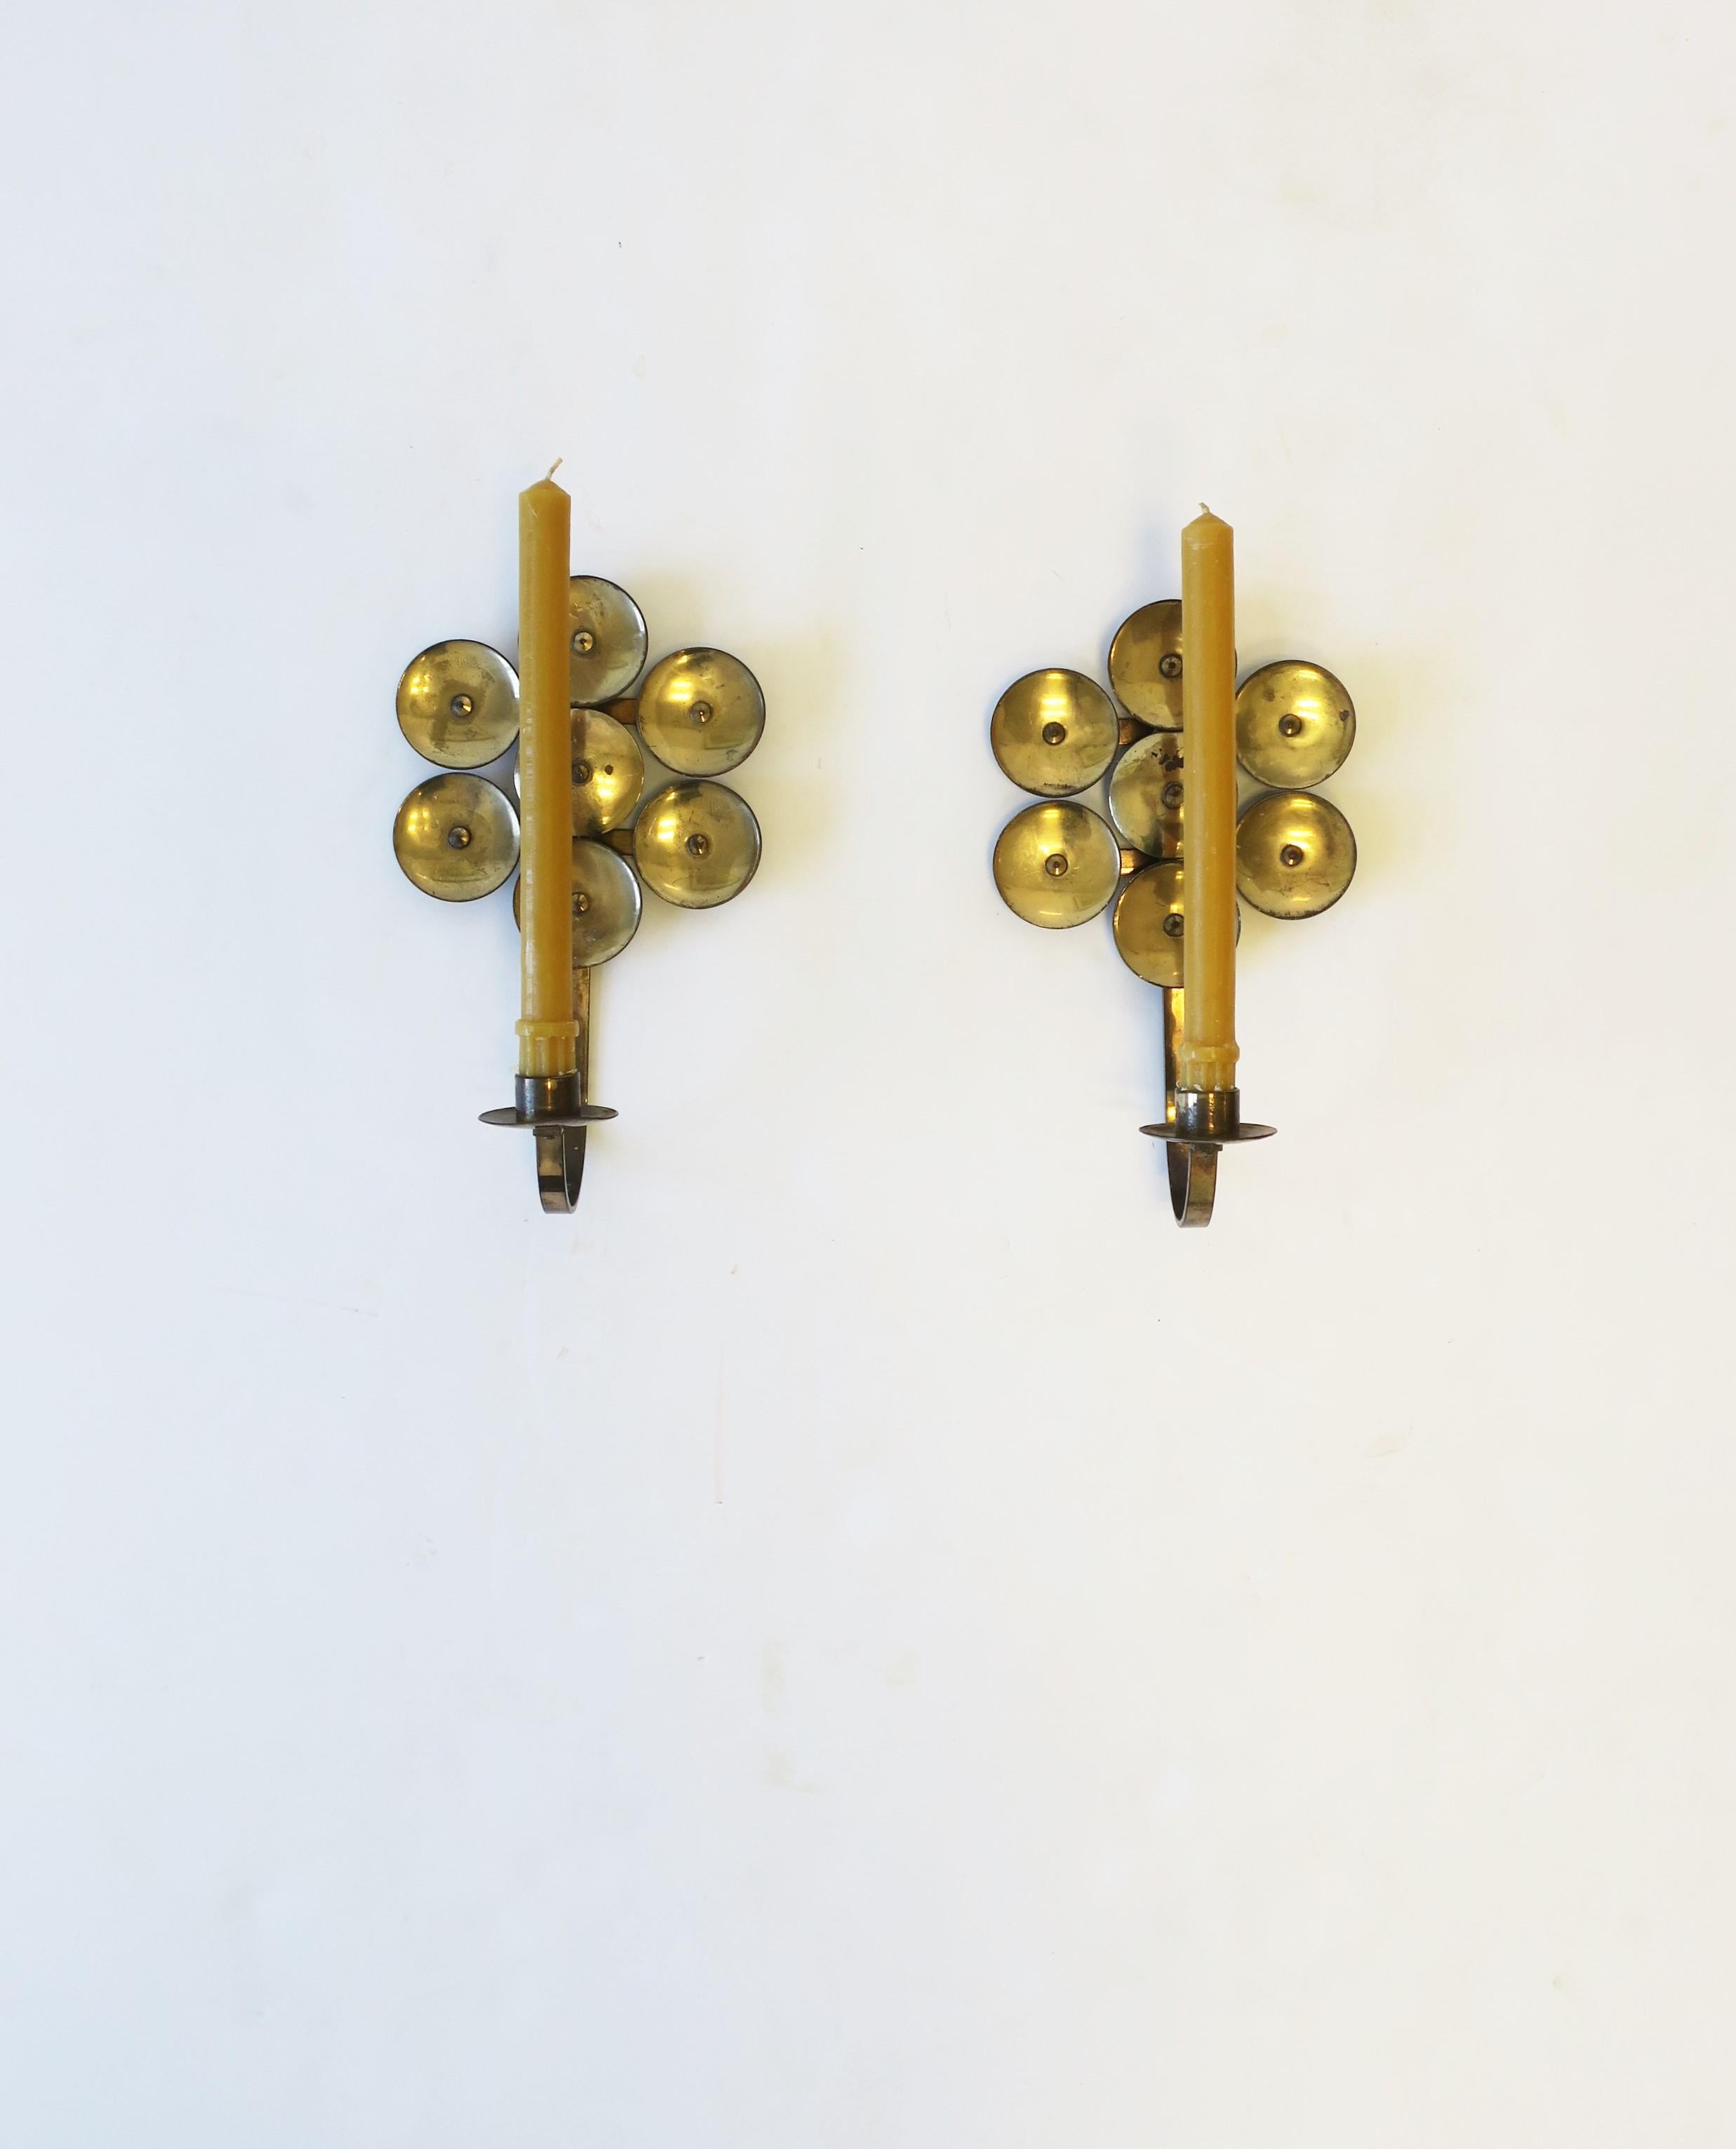 A pair of Scandinavian Modern Swedish brass candle wall sconces, circa mid-20th century, 1960s, Sweden. With maker's mark and origin mark on back as show in images #17 and 18. Dimensions: 5.5 W x 9.5